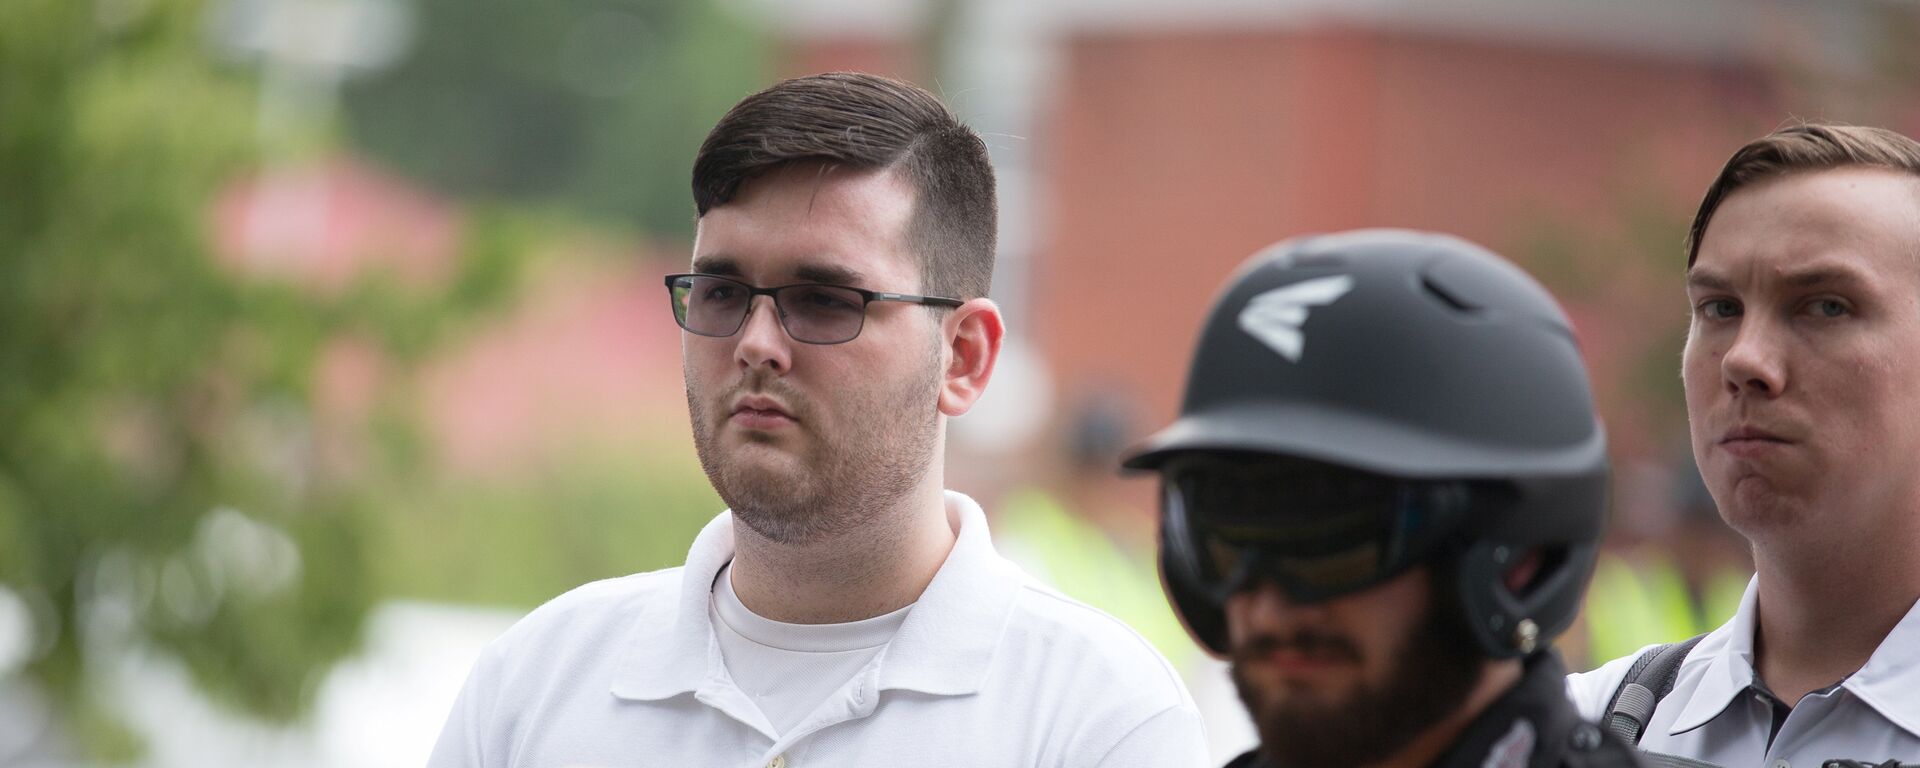 James Alex Fields Jr., (L) is seen attending the Unite the Right rally in Emancipation Park before being arrested by police and charged with charged with one count of second degree murder, three counts of malicious wounding and one count of failing to stop at an accident that resulted in a death after police say he drove a car into a crowd of counter-protesters later in the afternoon in Charlottesville, Virginia, U.S - Sputnik International, 1920, 28.06.2019